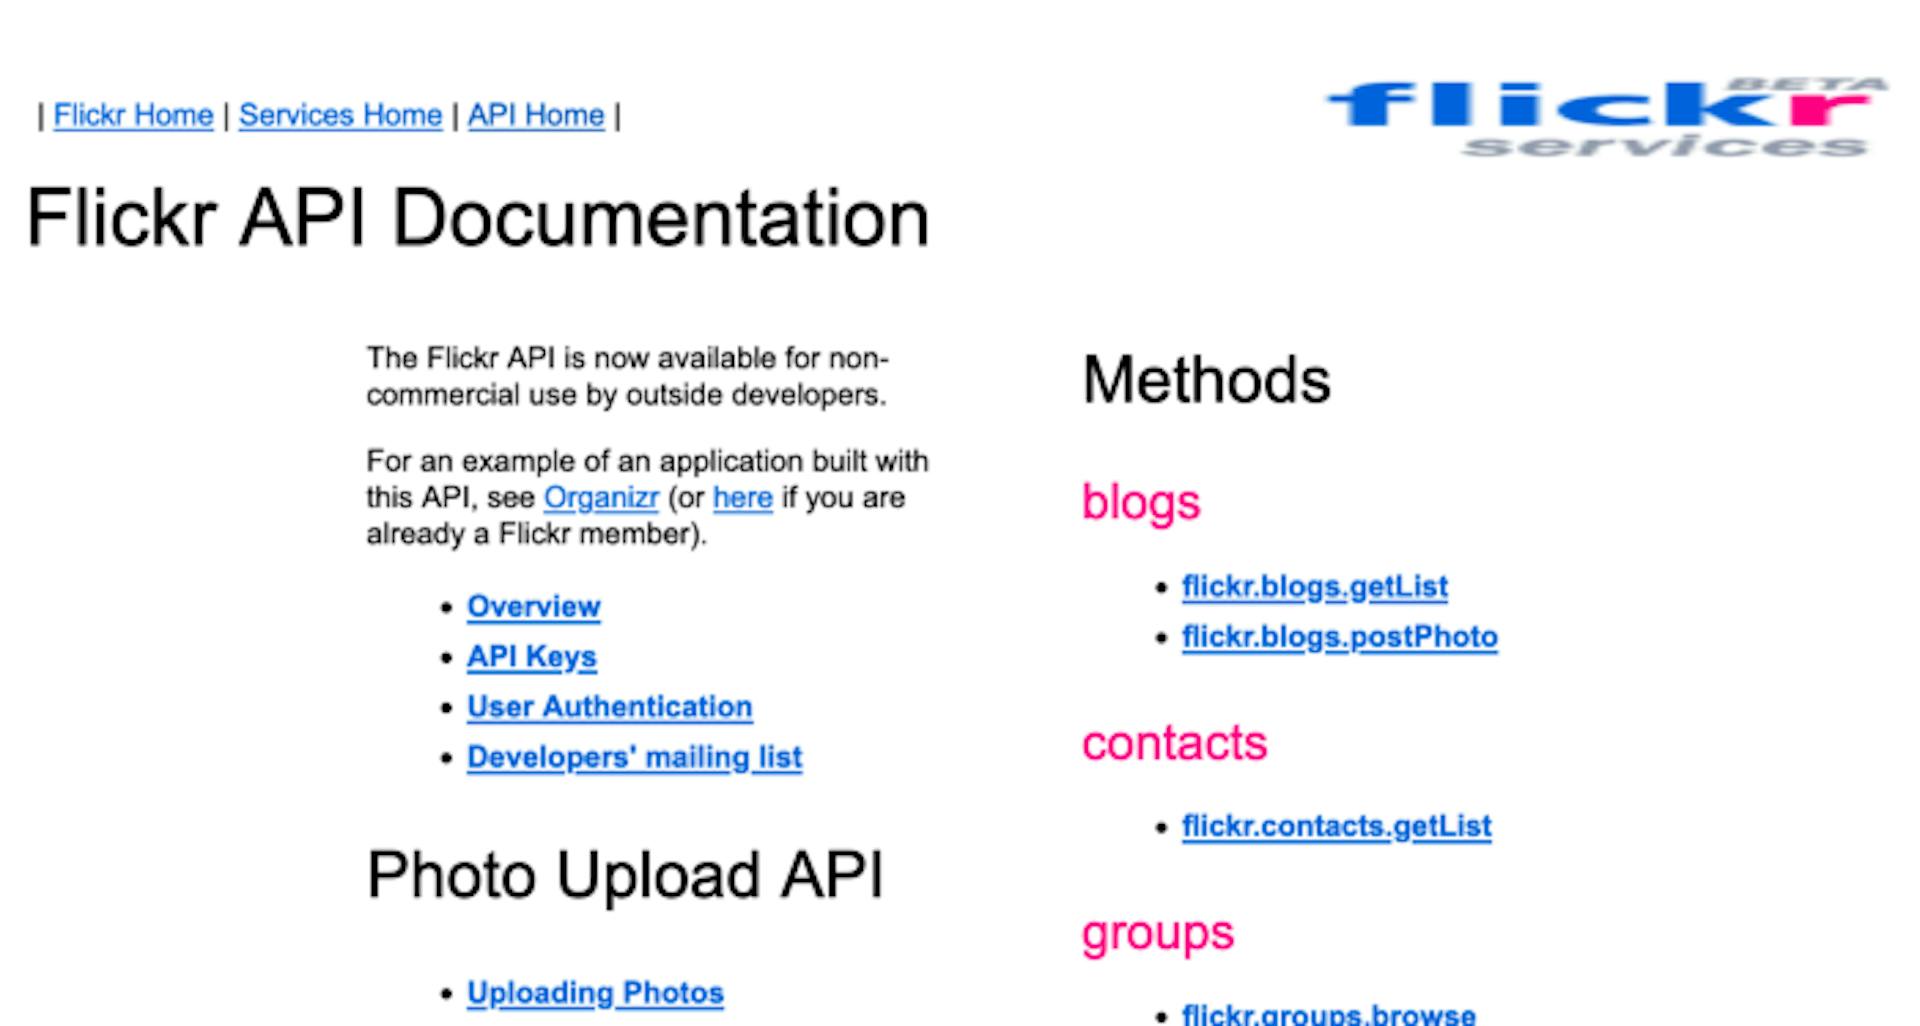 flickr.com/services/api from August, 21 2004 accessed via the Wayback Machine